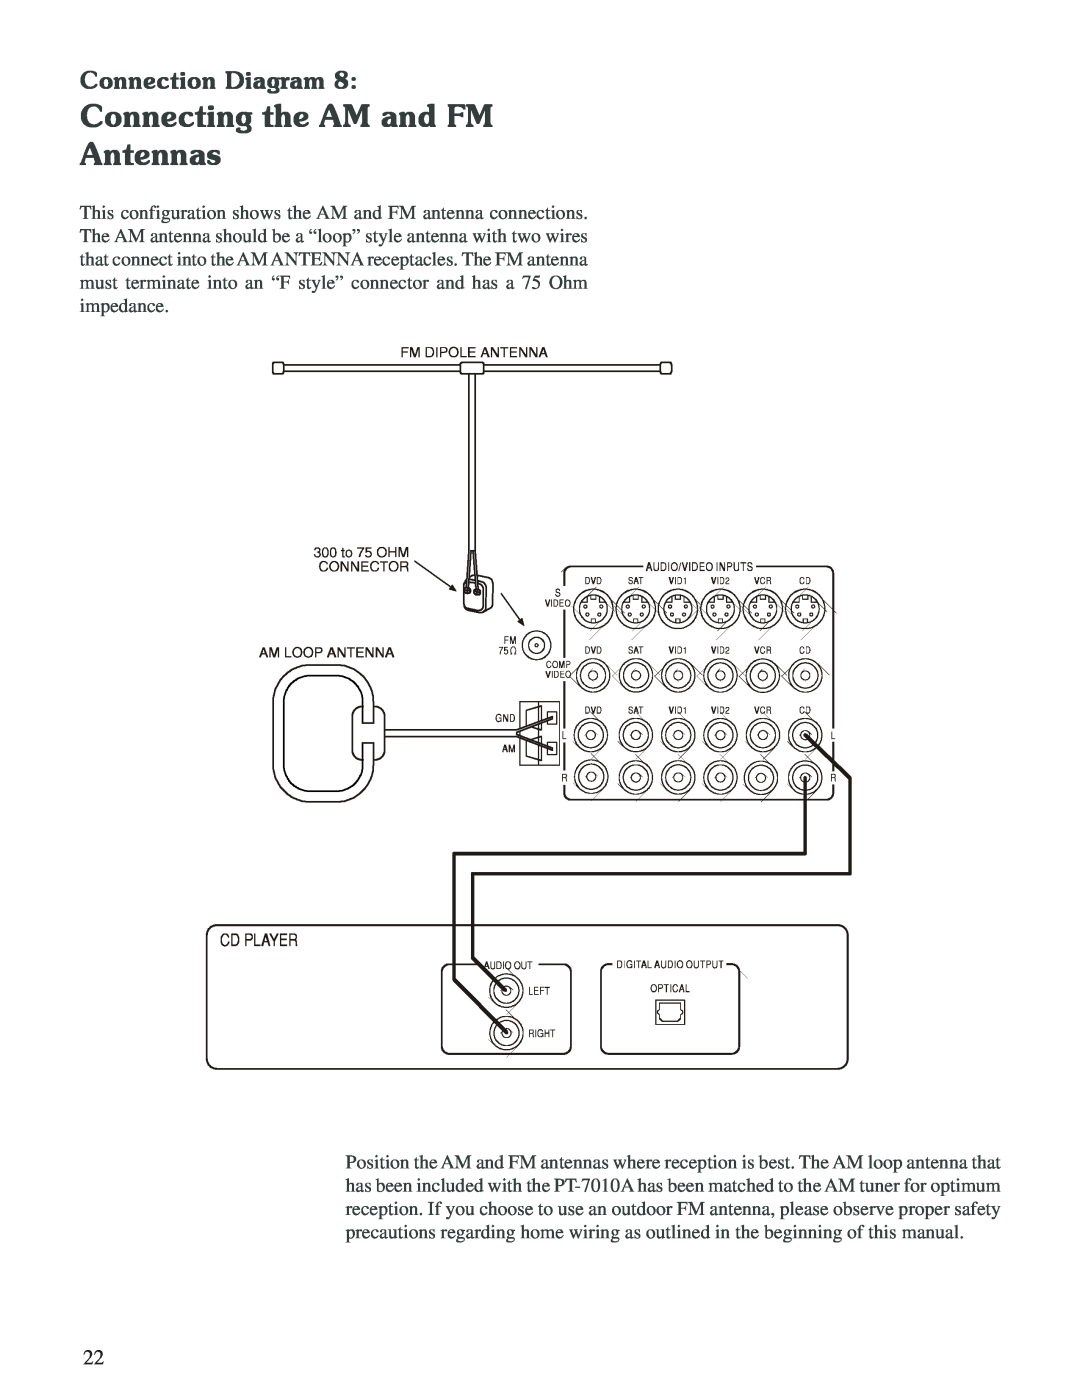 Sherbourn Technologies PT-7010A owner manual Connecting the AM and FM Antennas, Connection Diagram 